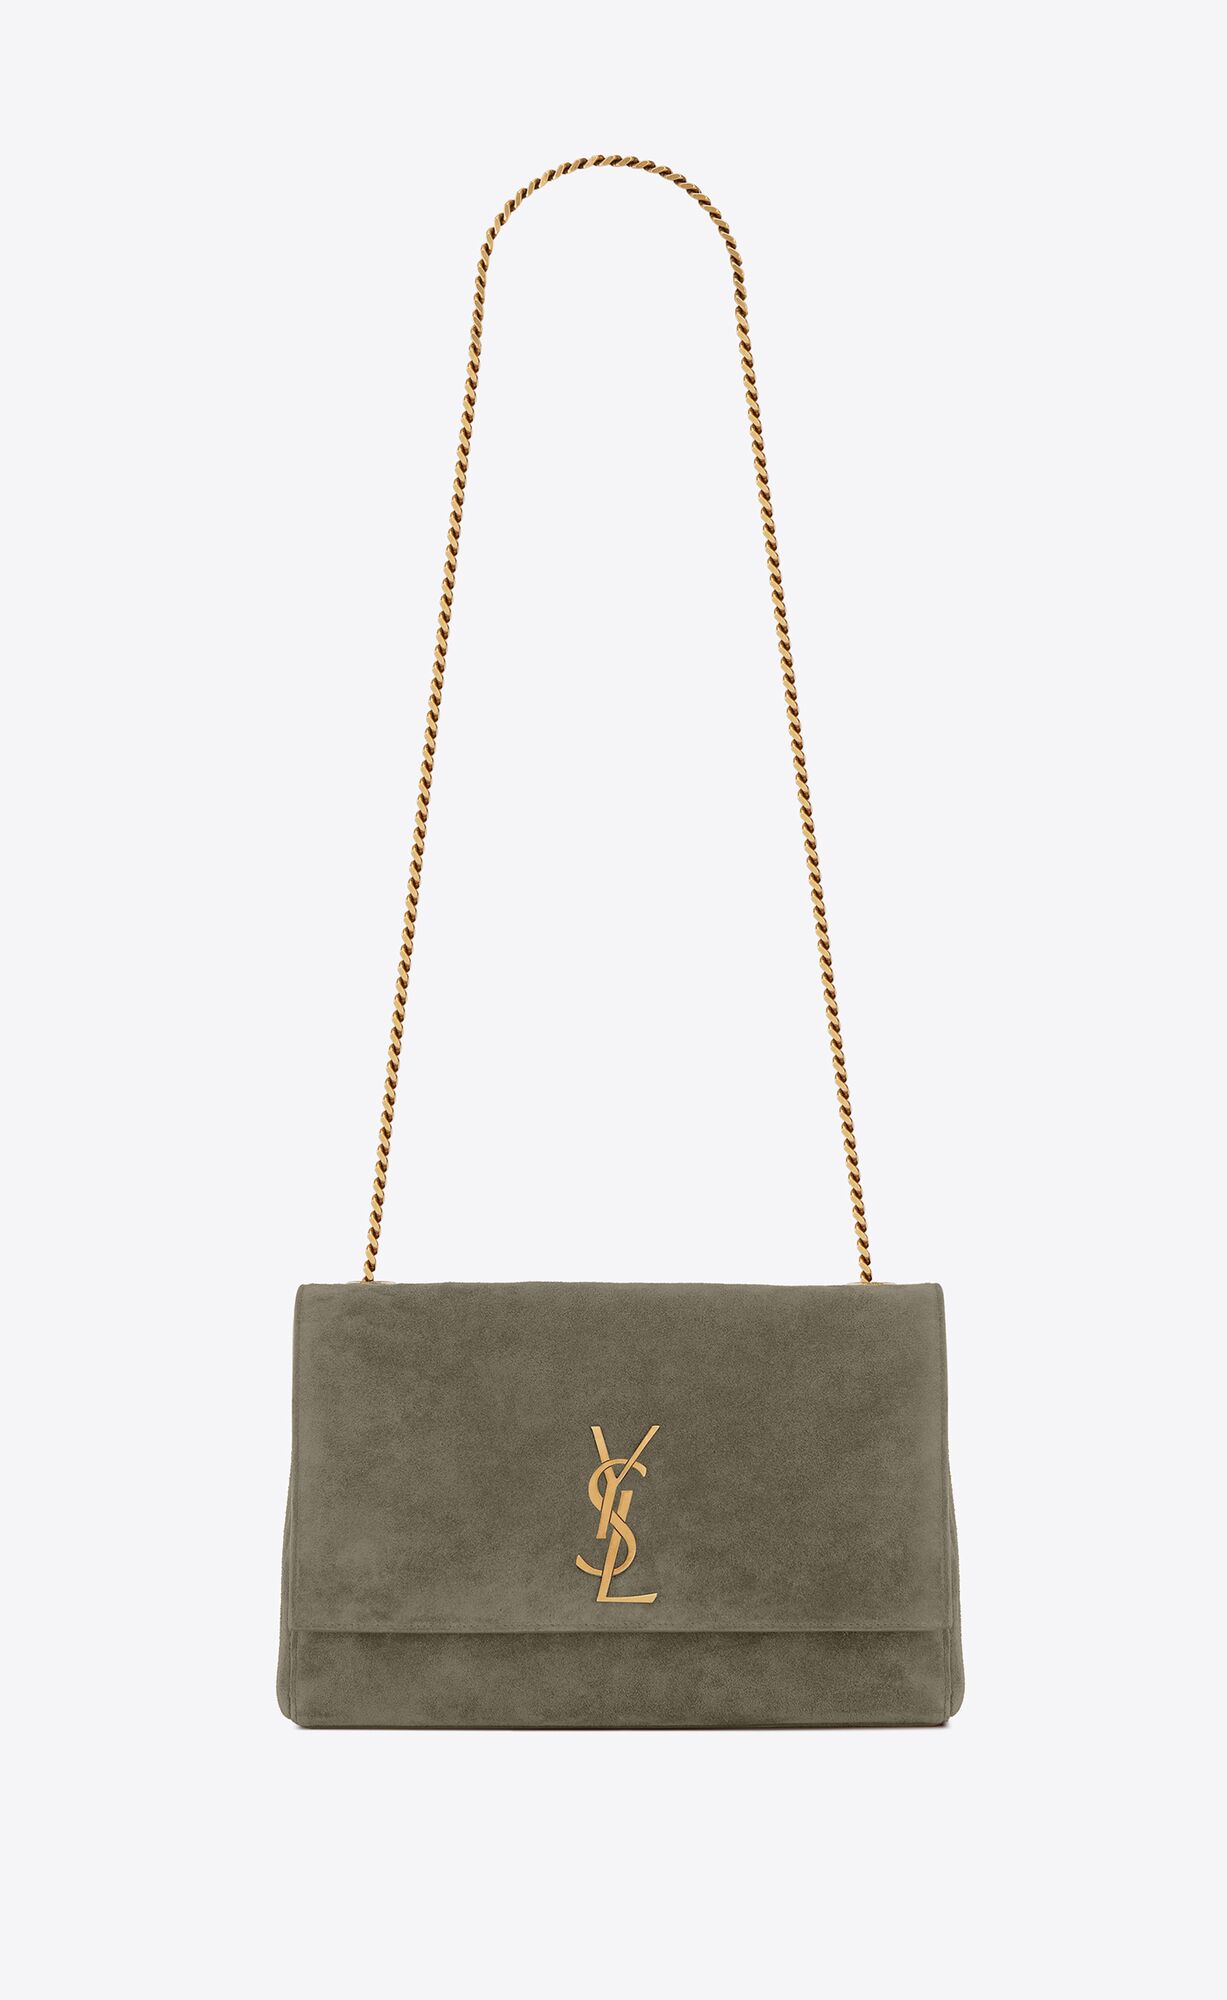 Saint Laurent Kate Medium Reversible Chain Bag In Shiny Leather And Suede – Grey Khaki – 5538040UD7W1229